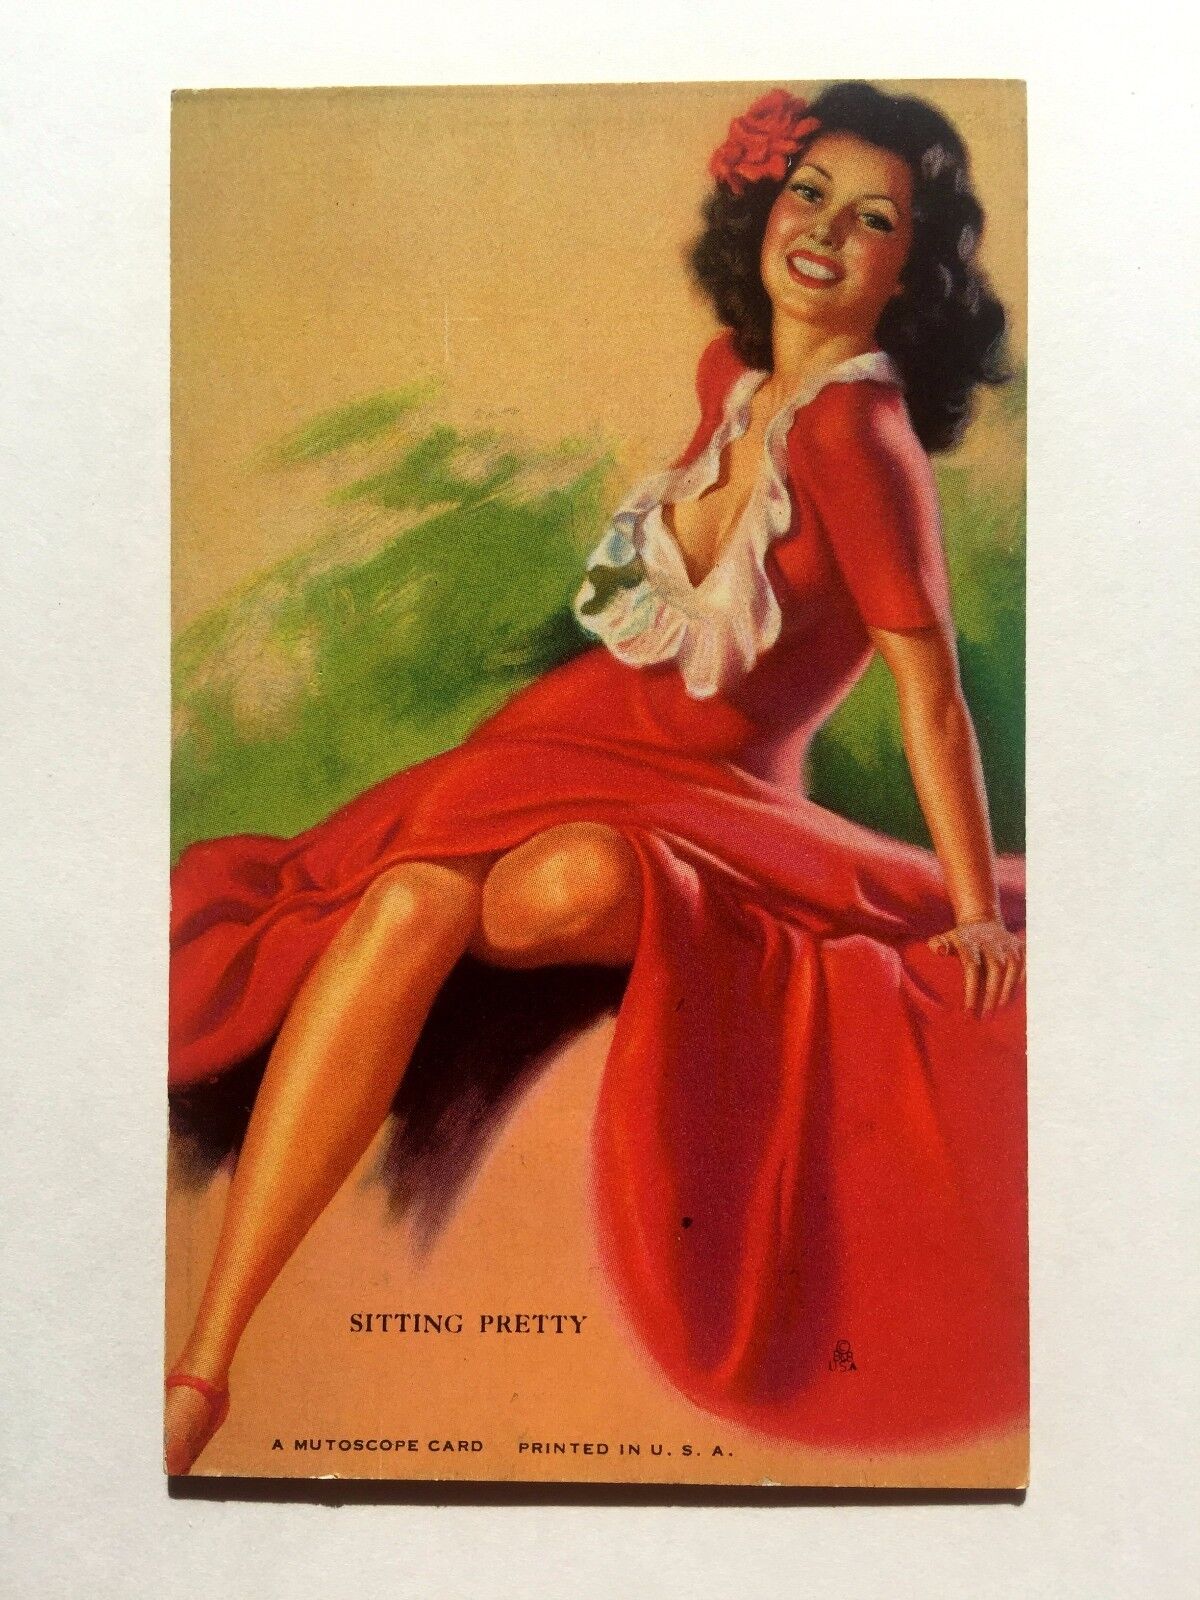 1940s Pinup Girl Picture Mutoscope - Brunette in Red Dress - Sitty Pretty